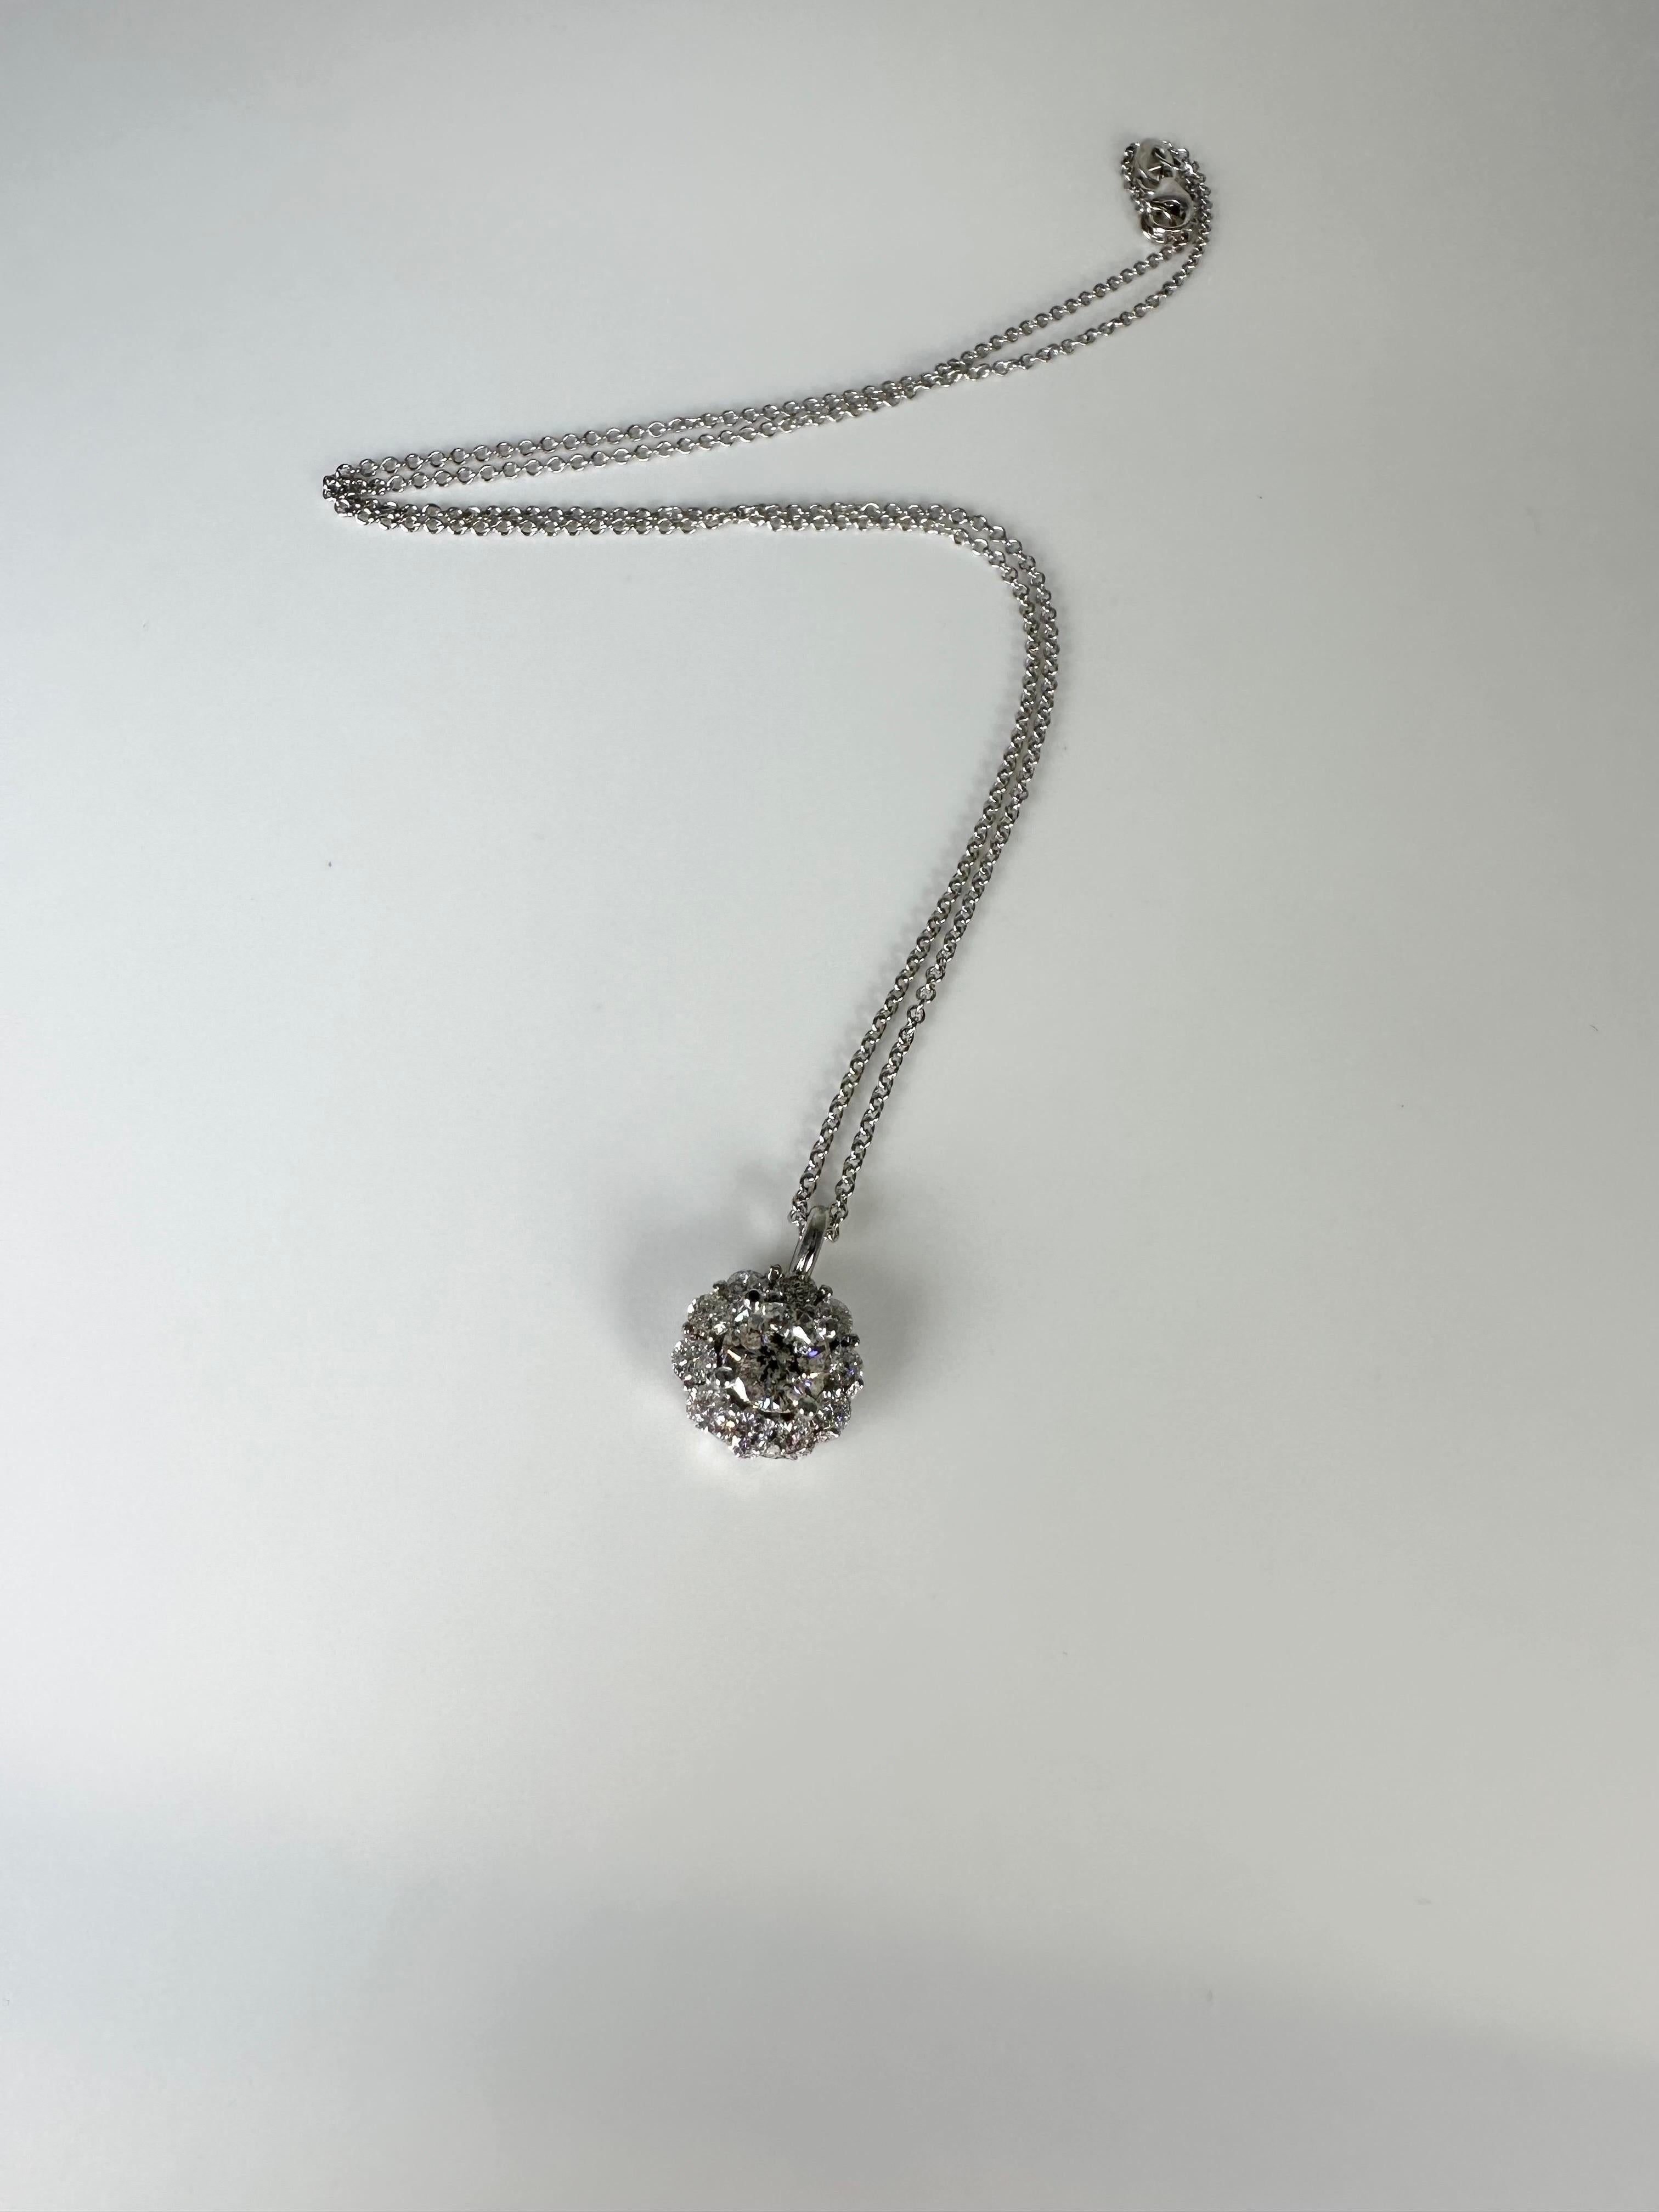 Diamond Halo Pendant 14 Karat White Gold Floral Pendant Necklace 1.43 Carat In New Condition For Sale In Jupiter, FL